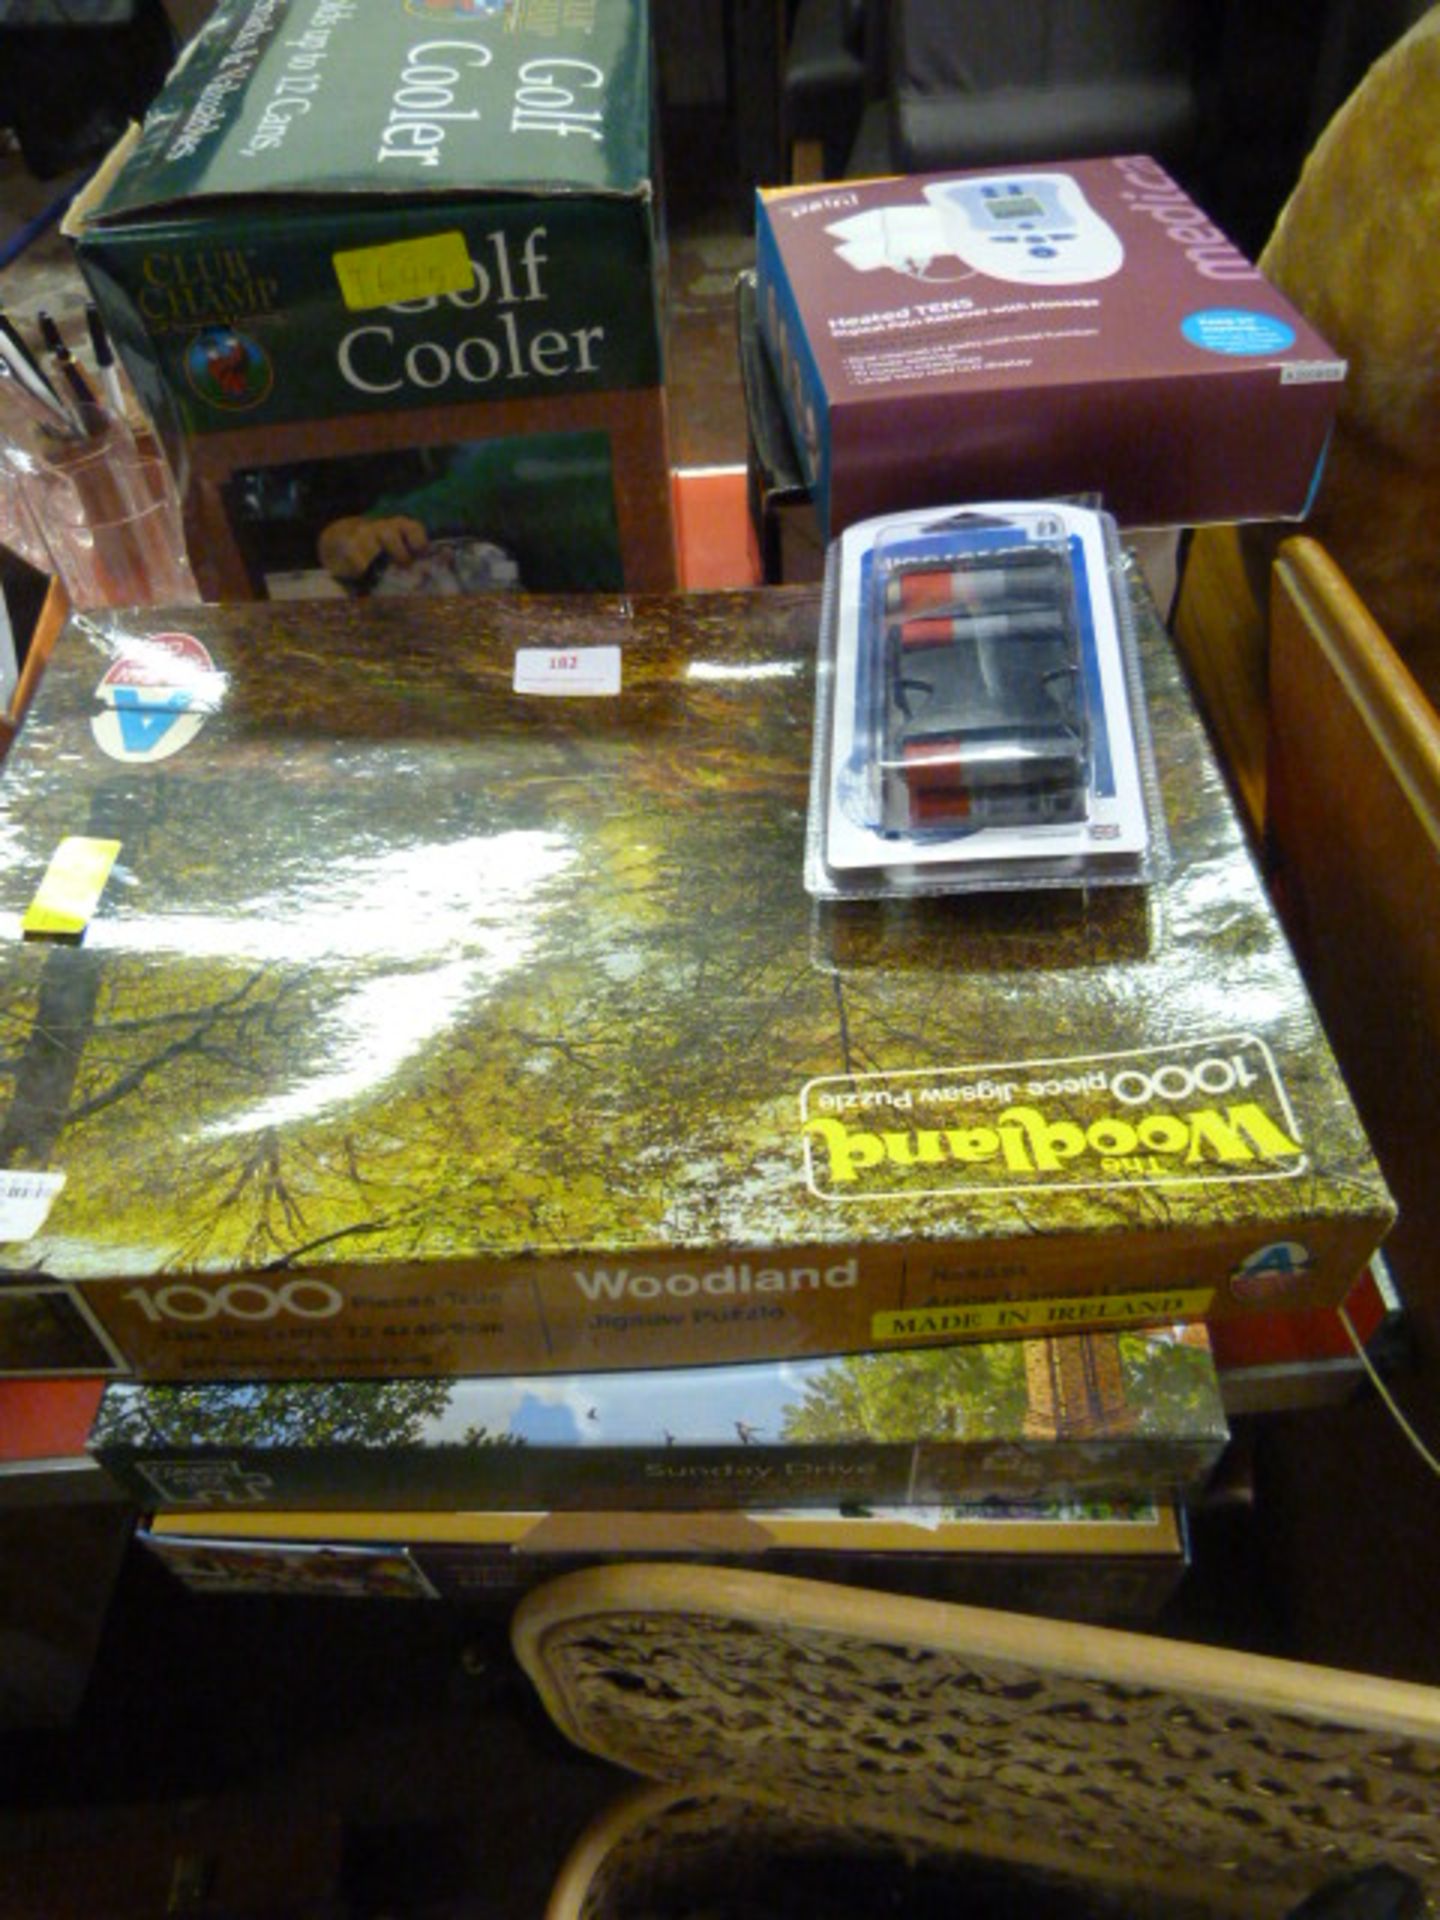 Mixed Lot of Puzzles, Golf Cooler, Luggage Straps,